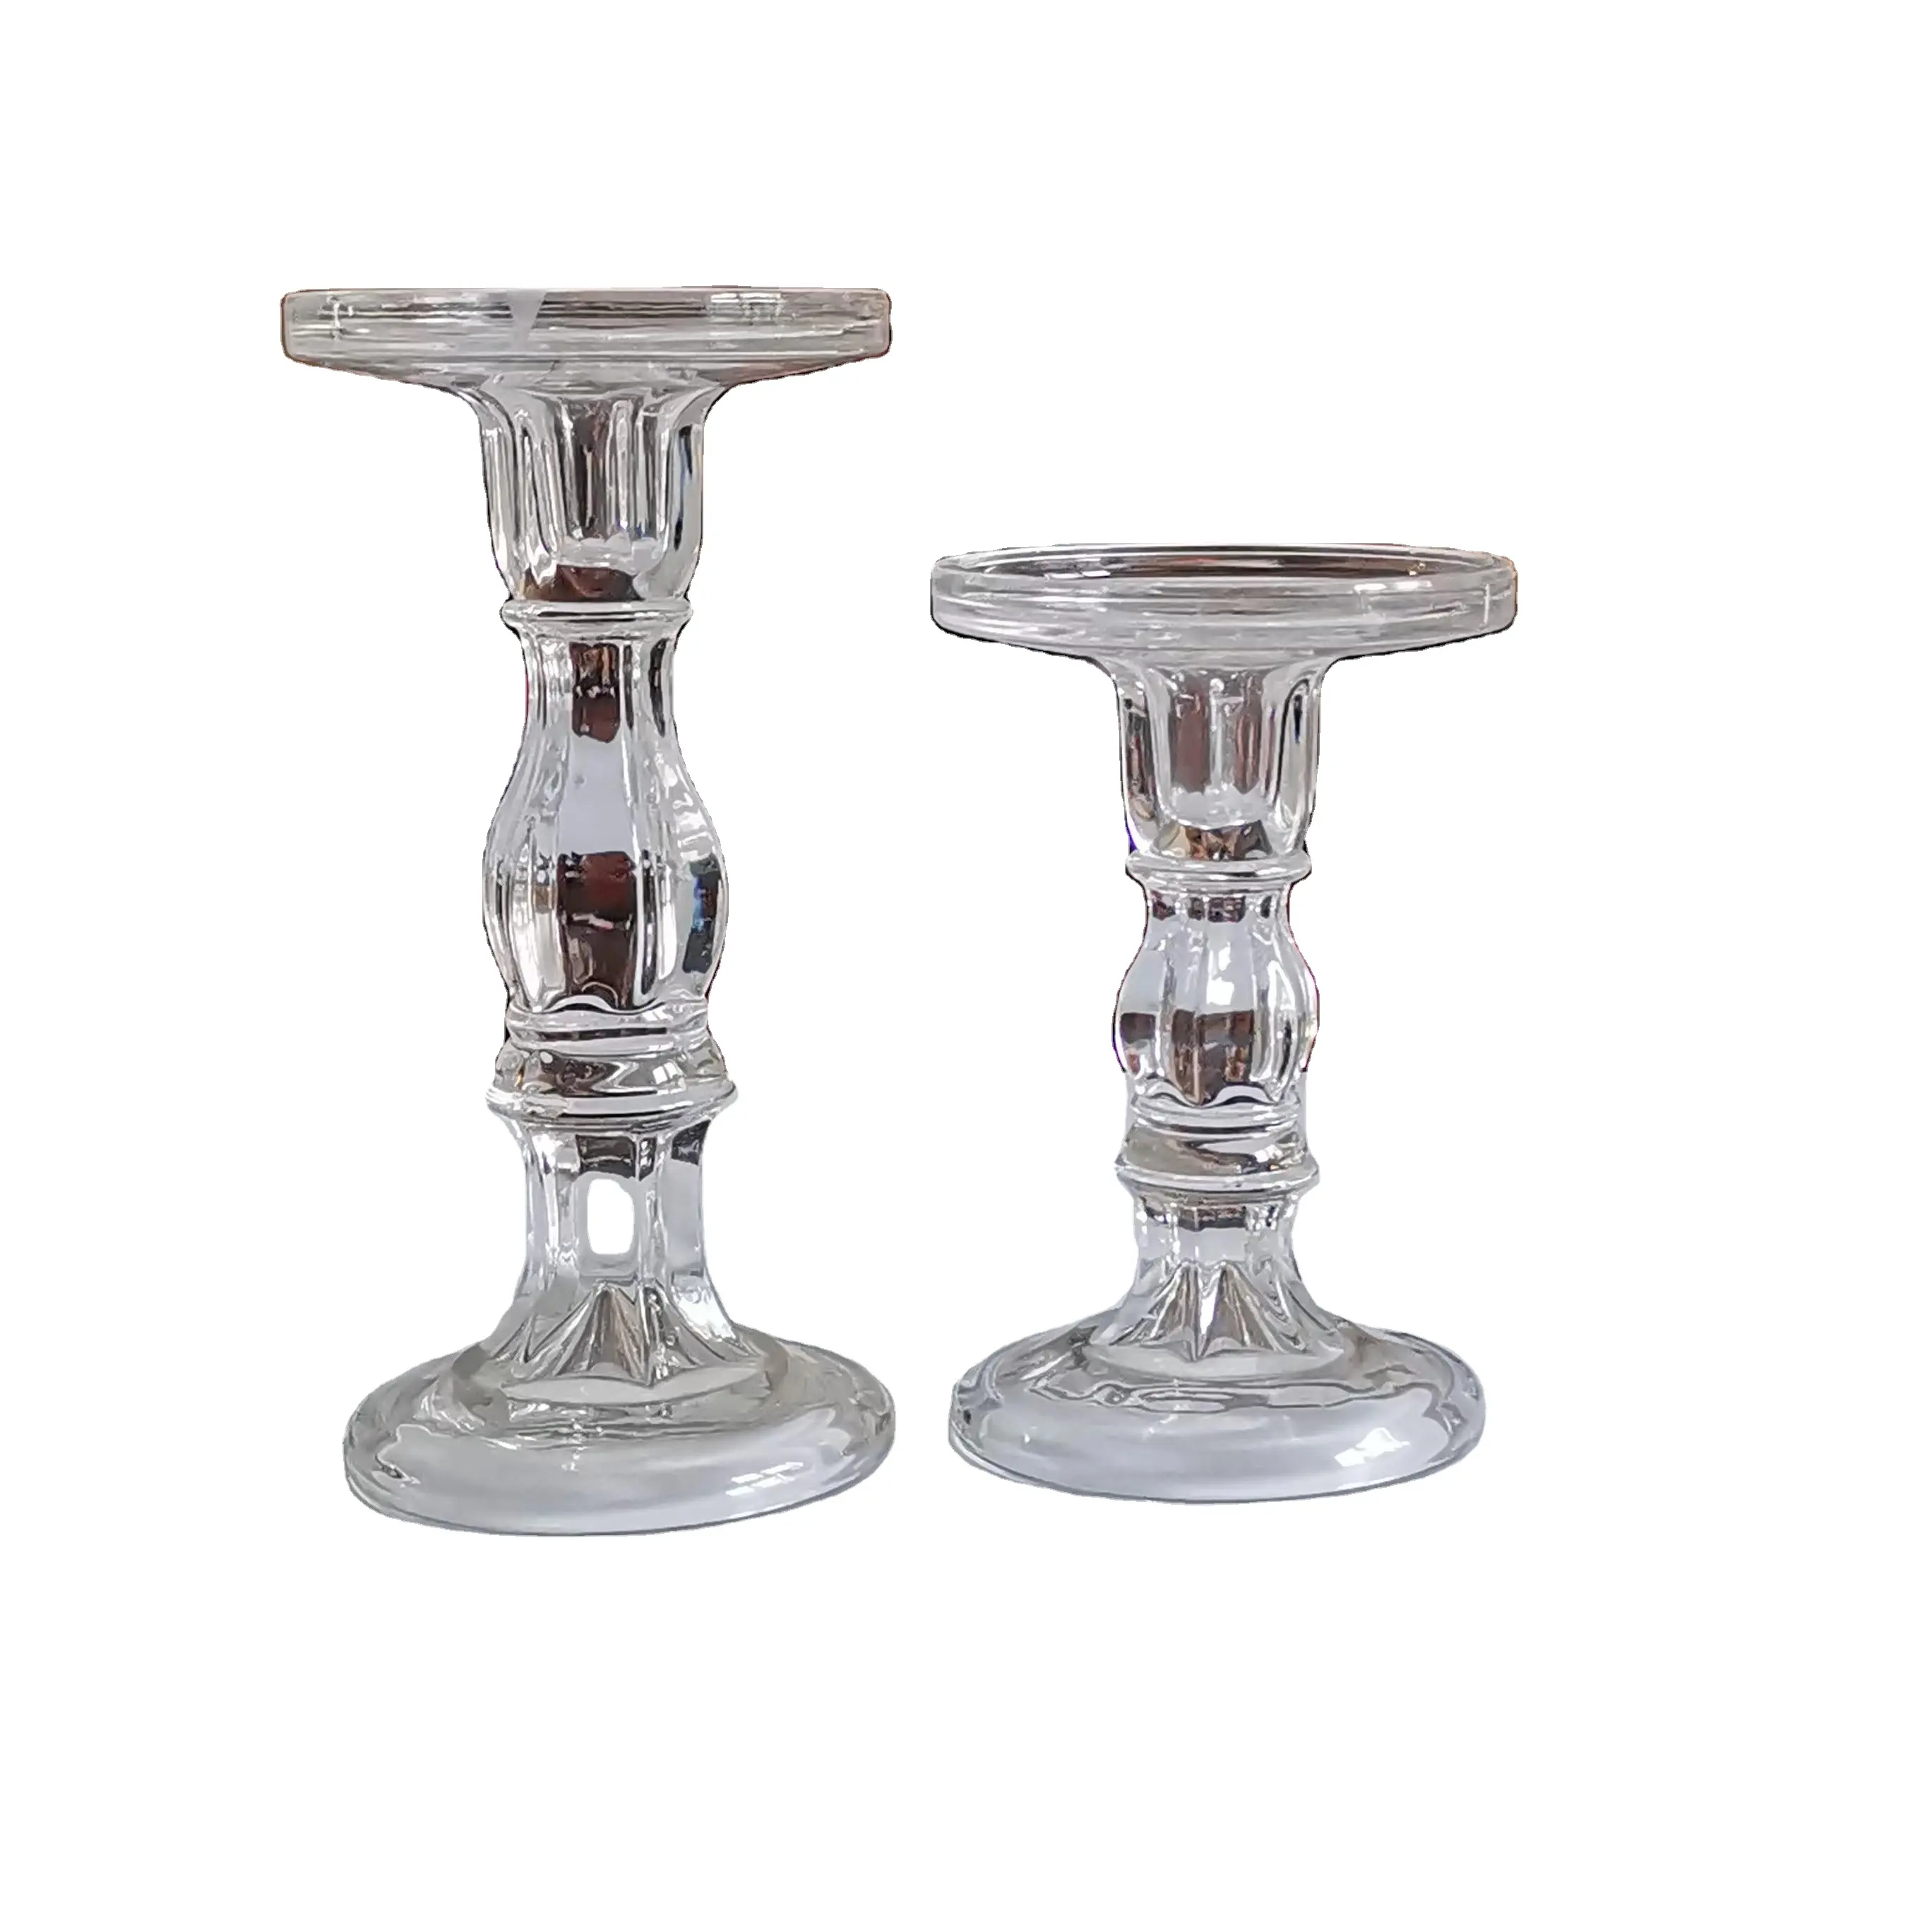 Customized vintage hurricane glass candlestick crystal glass candle holder home decor pillar glass taper candle holders